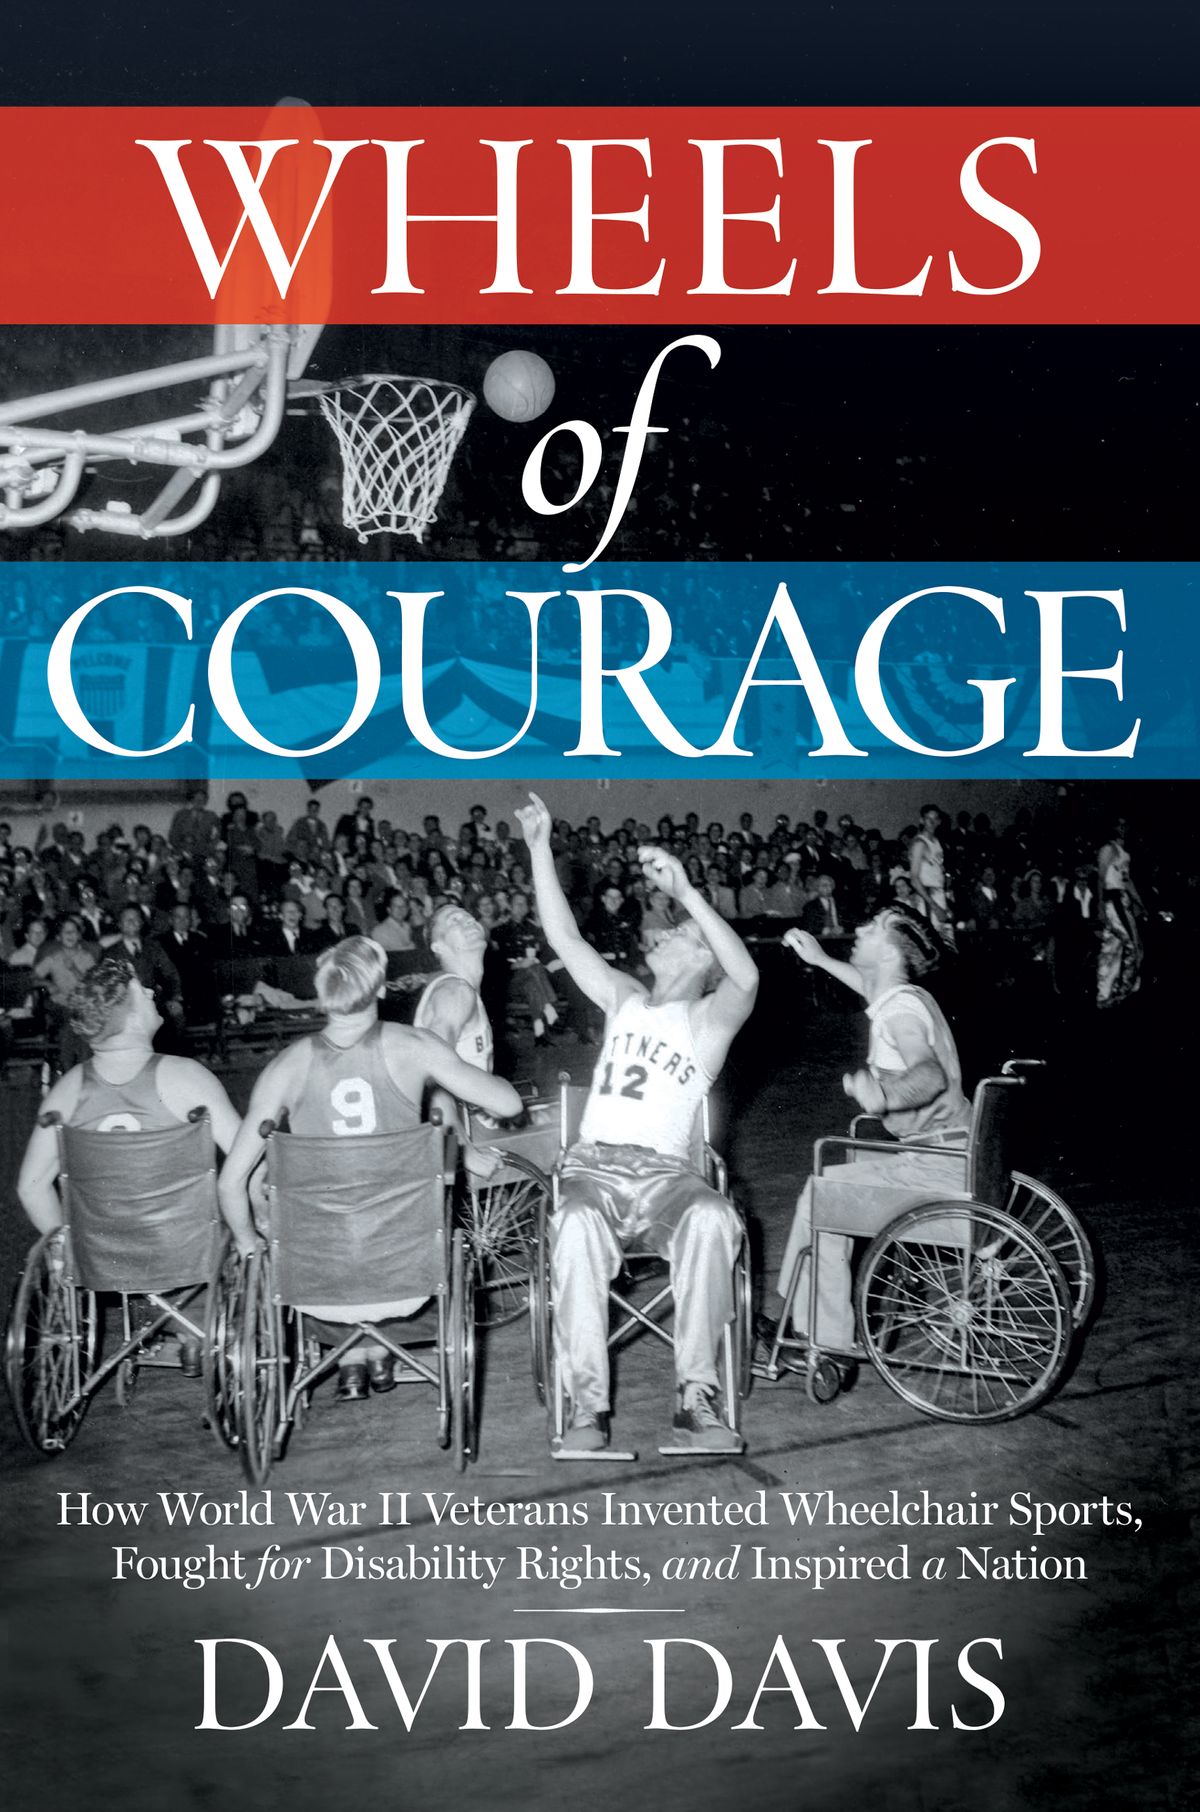 Image is a book cover. The words Wheels of Courage appear of red and blue bands of colour on top of a old 1950s-era picture of 5 young white men in wheelchairs crowded under a basketball hoop. The athletes wear the jerseys of two opposing teams. One player in the foreground has his arms extending, having just tossed a basketball towards the hoop while his teammates watch excitedly. Spectators seated in stands are visible in the background of the photograph. On the bottom of the photograph is text reading: H